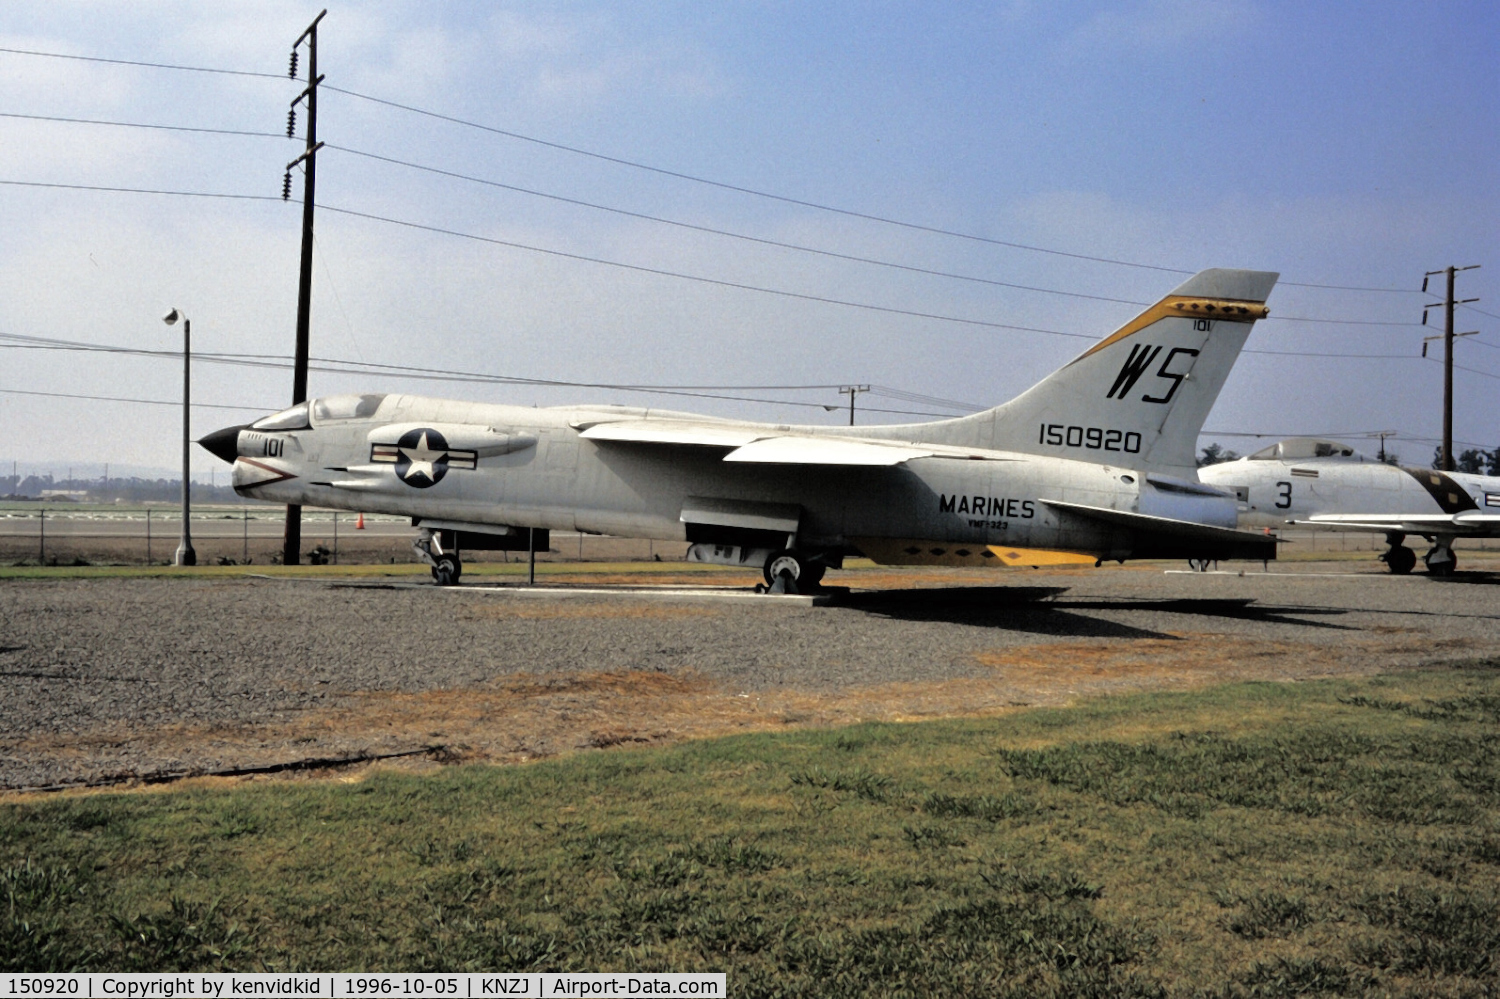 150920, Vought F-8E Crusader C/N 1205, Copied from slide.